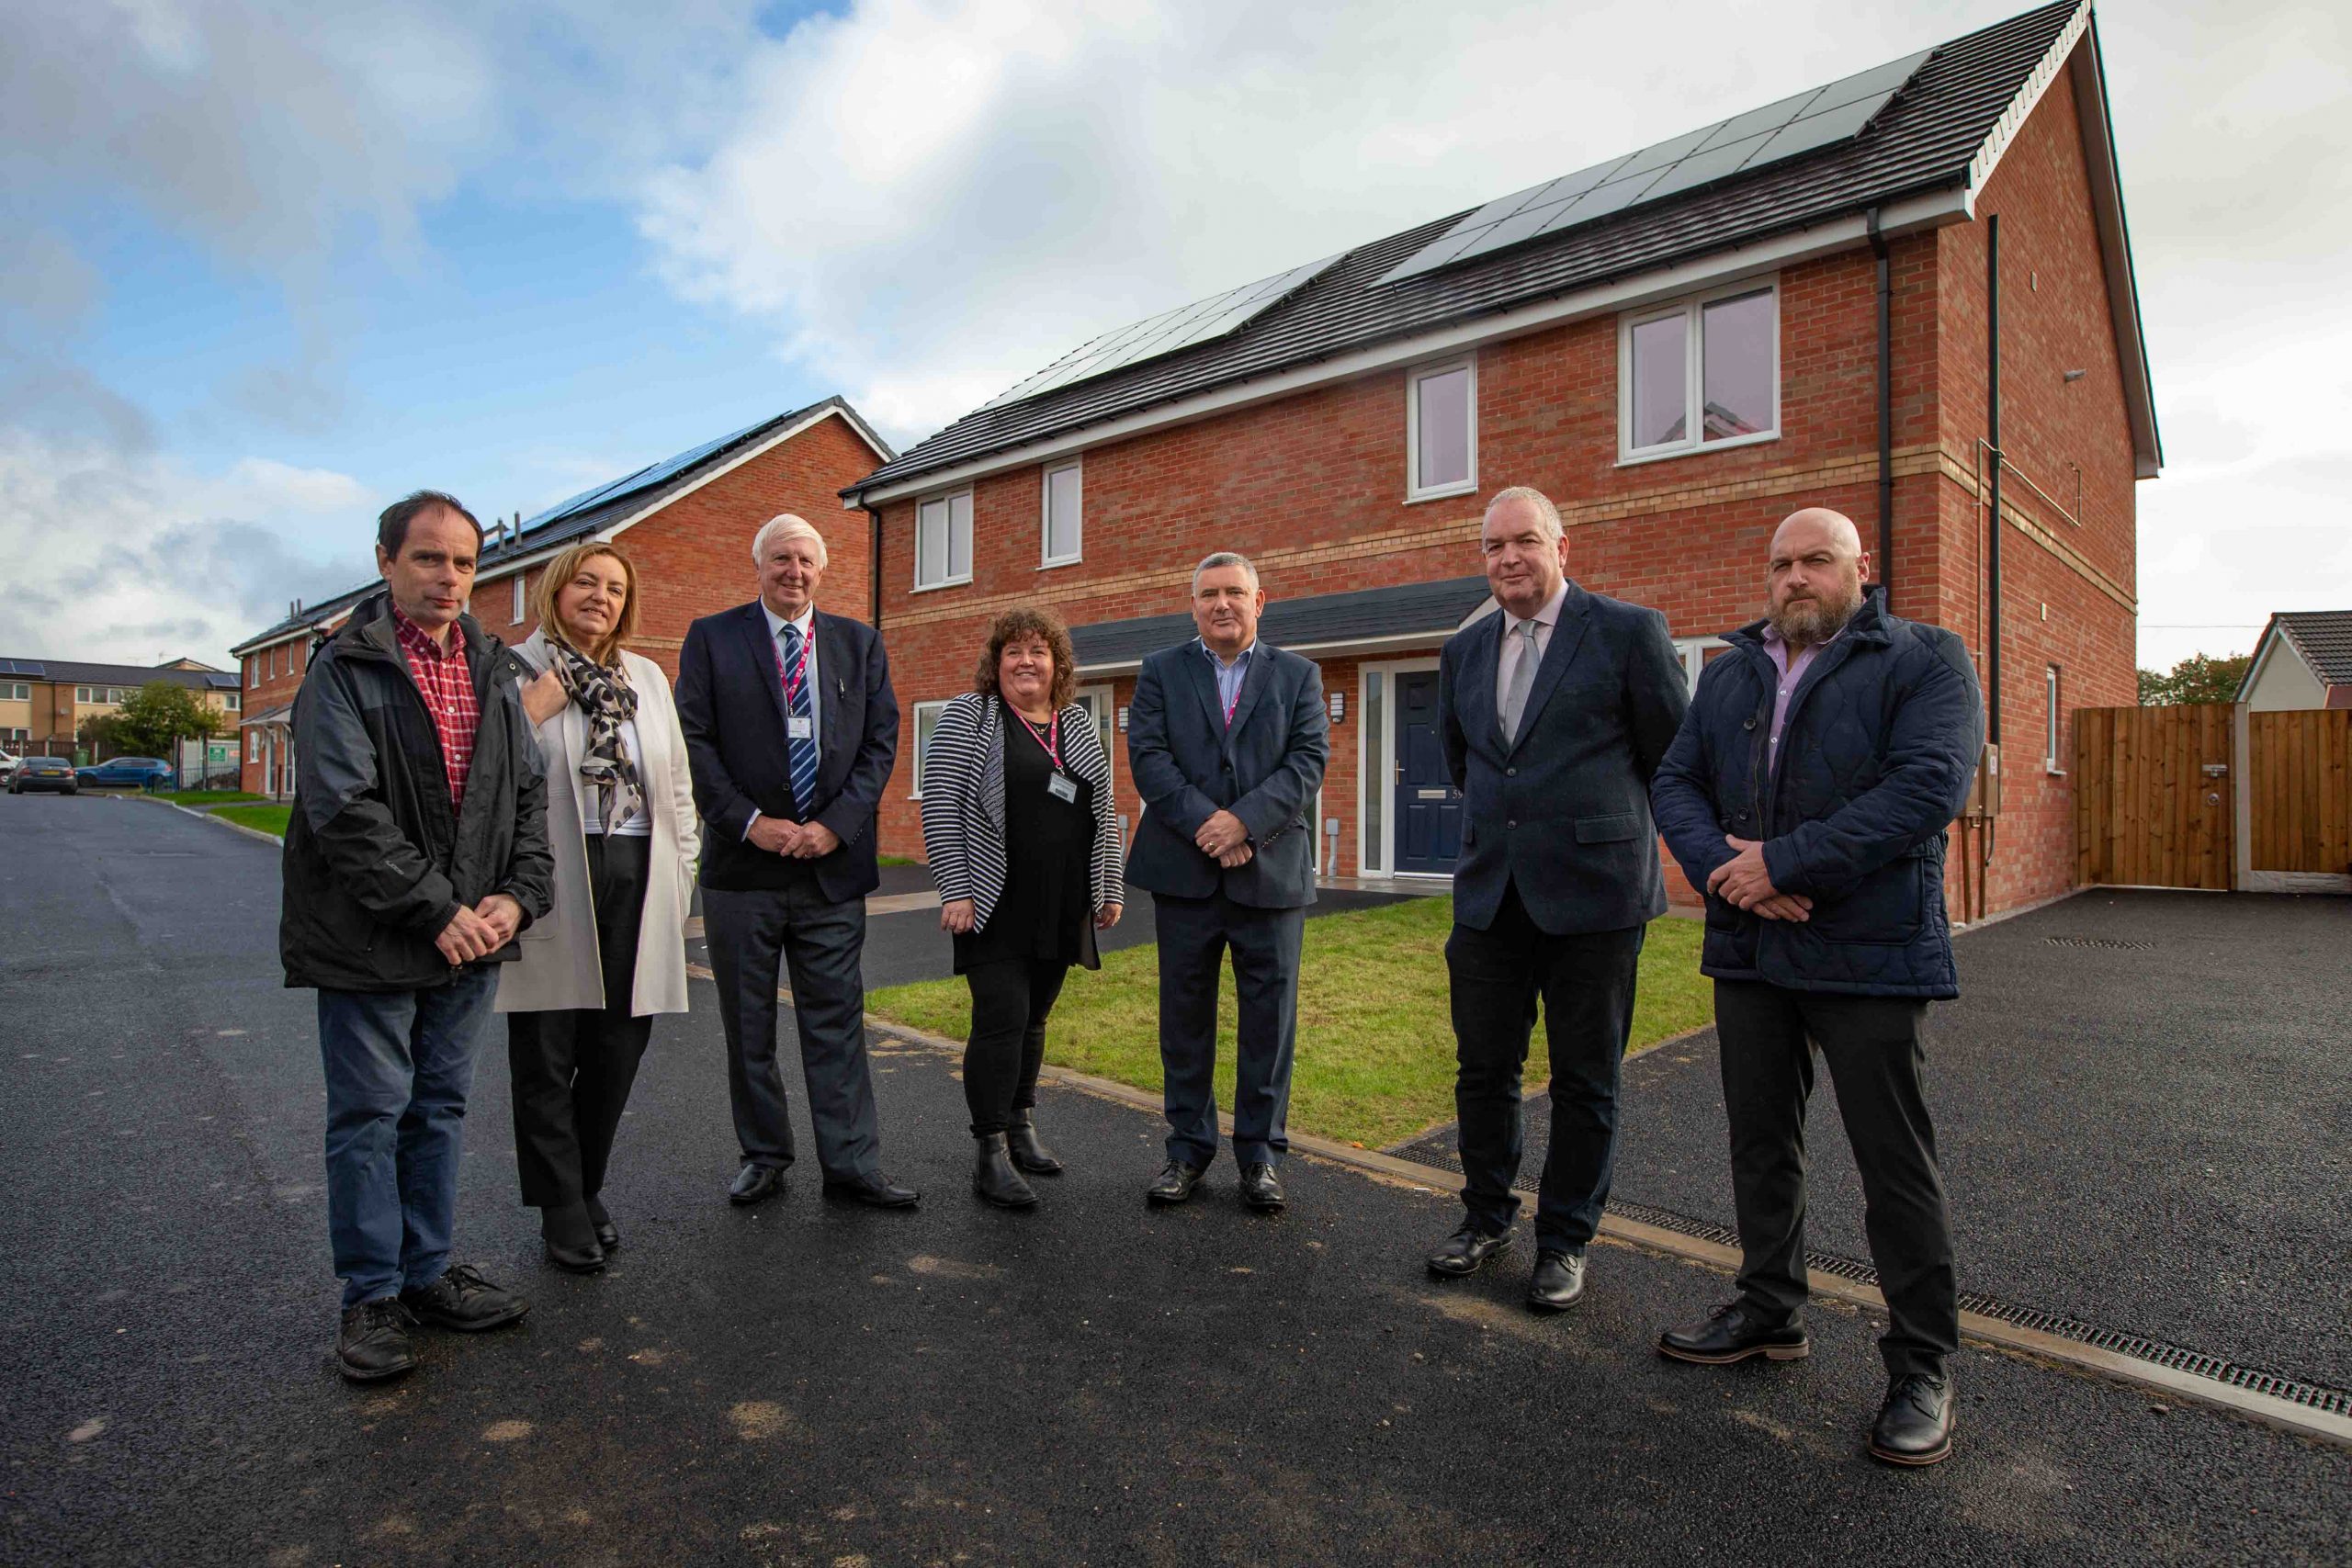 £2.6 million investment in new build social housing